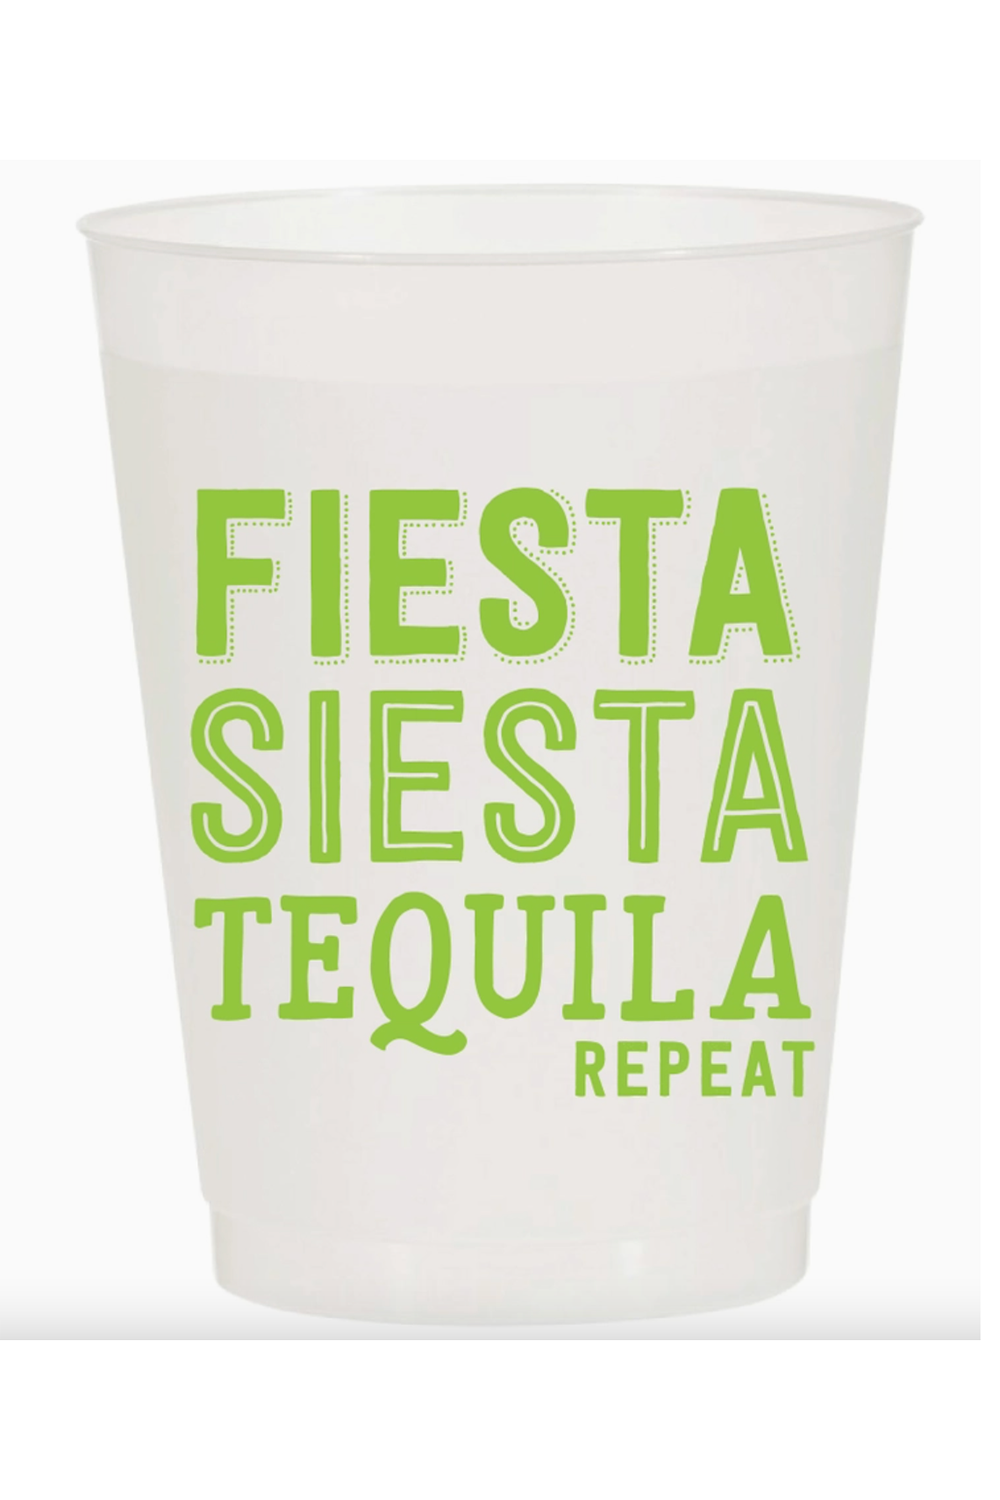 Frosted Cup Pack - Fiesta Siesta Tequila Repeat